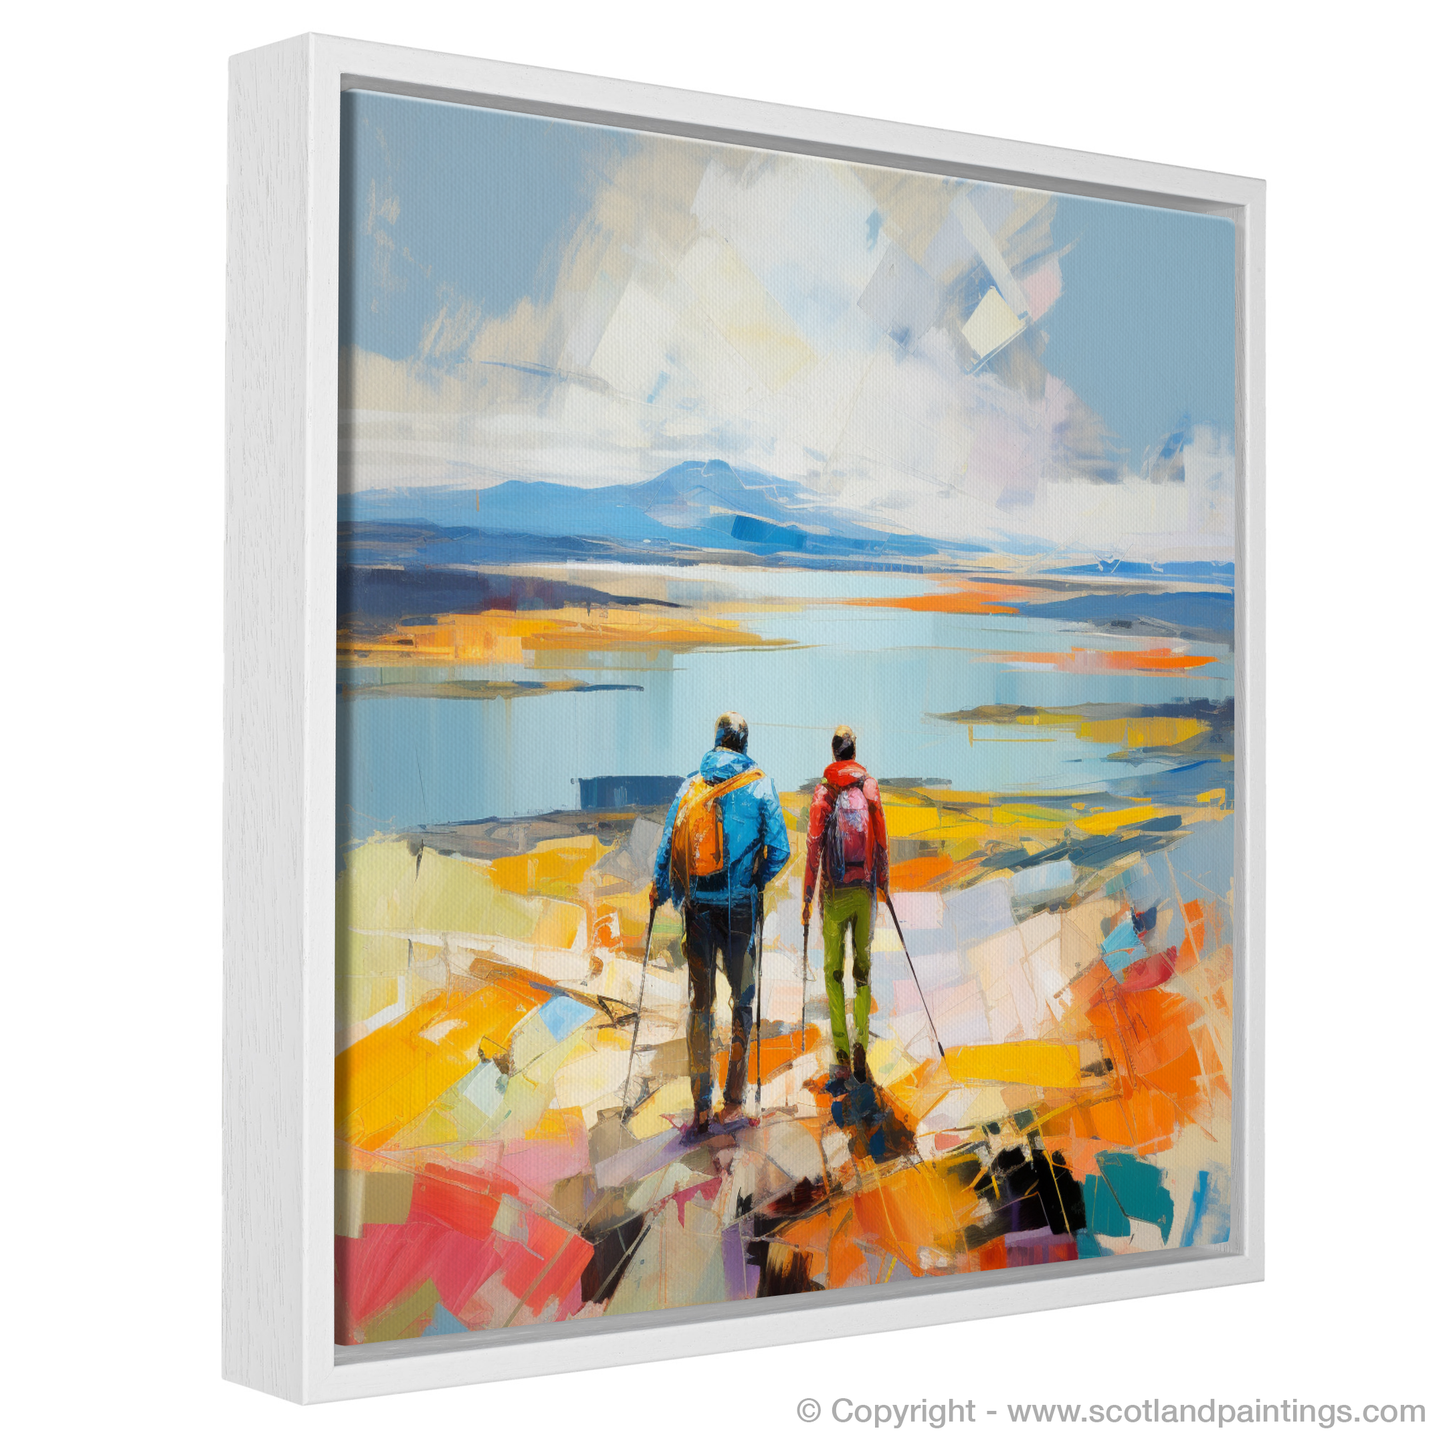 Painting and Art Print of Two hikers looking out on Loch Lomond entitled "Hikers' Haven: An Abstract Ode to Loch Lomond".